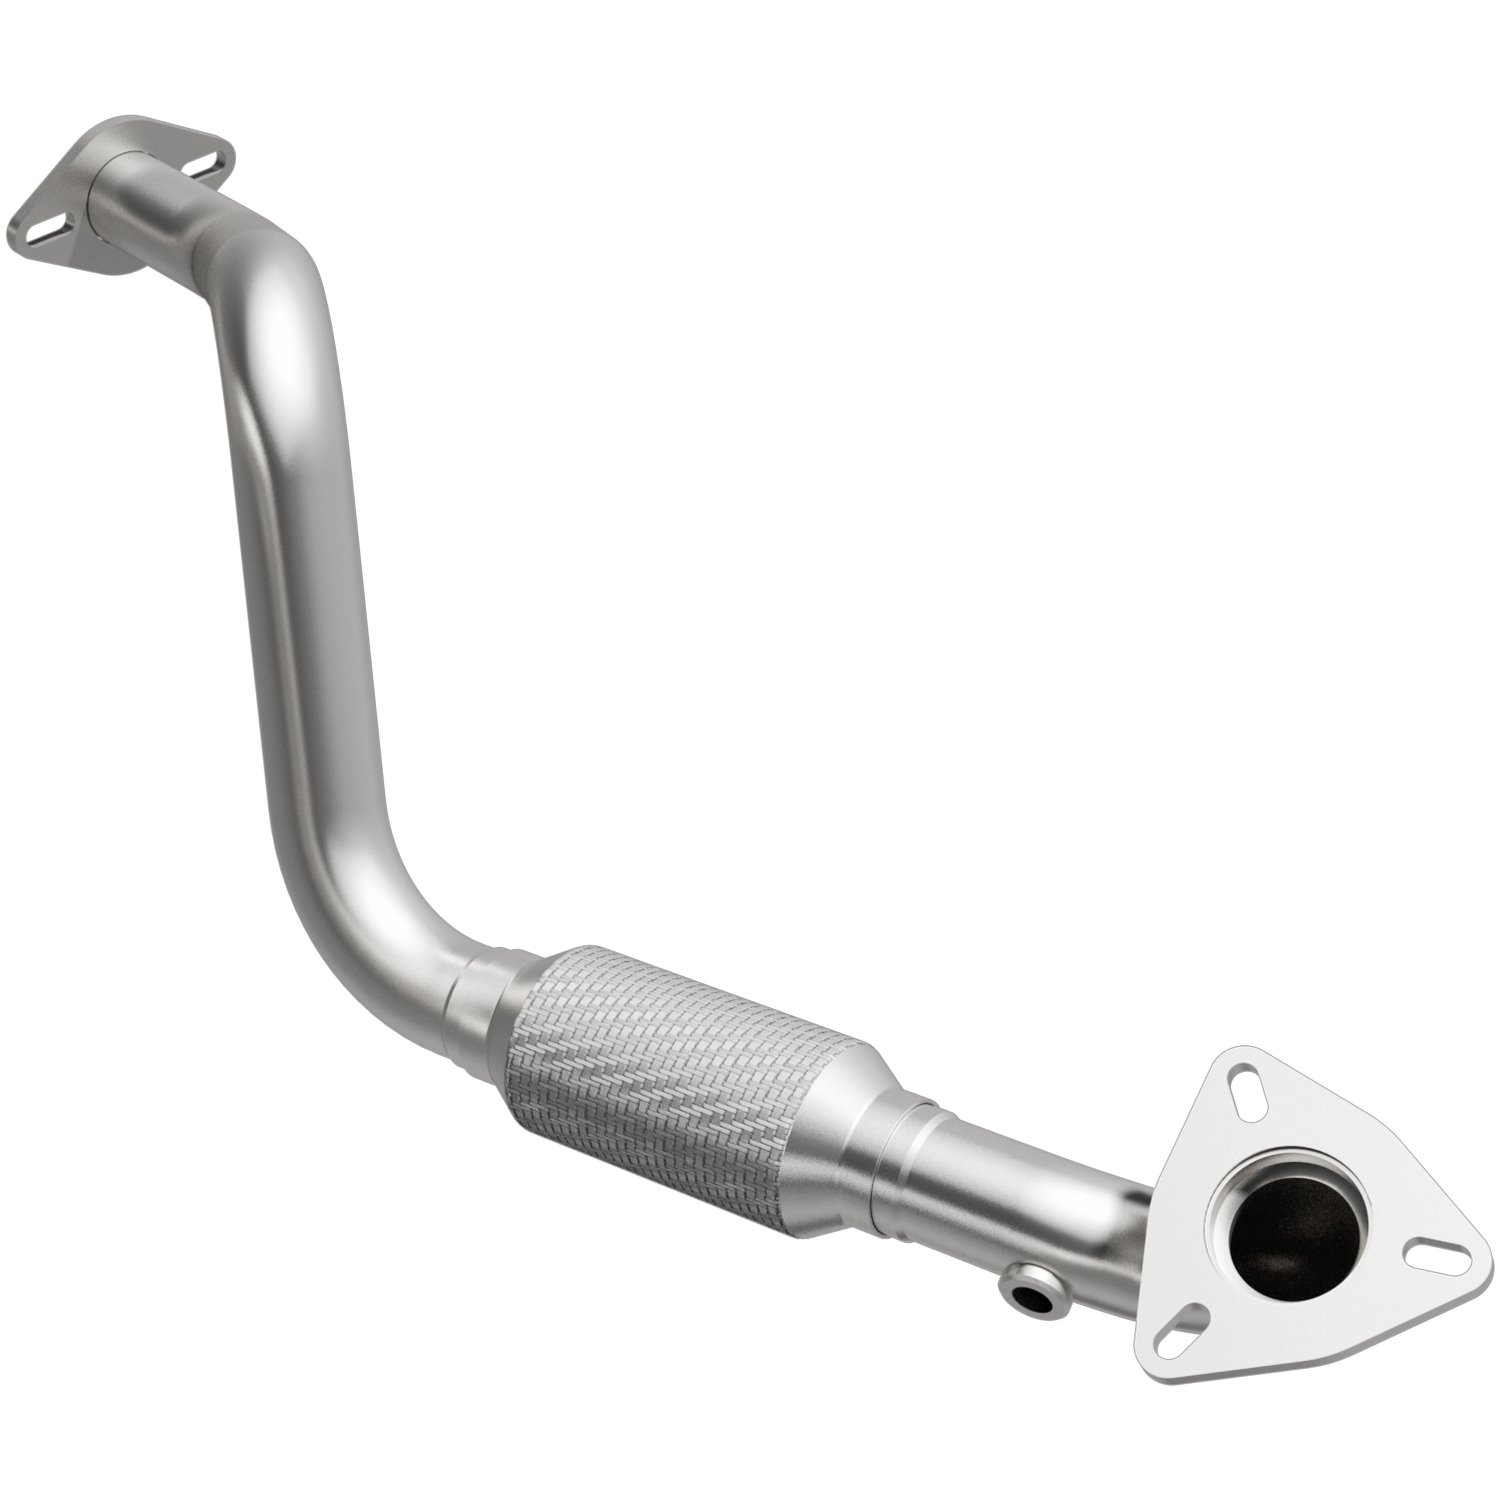 Direct-Fit Exhaust Intermediate Pipe, 2004-2008 Chevy Aveo/Aveo5, Swift+, Wave/Wave5 1.6L